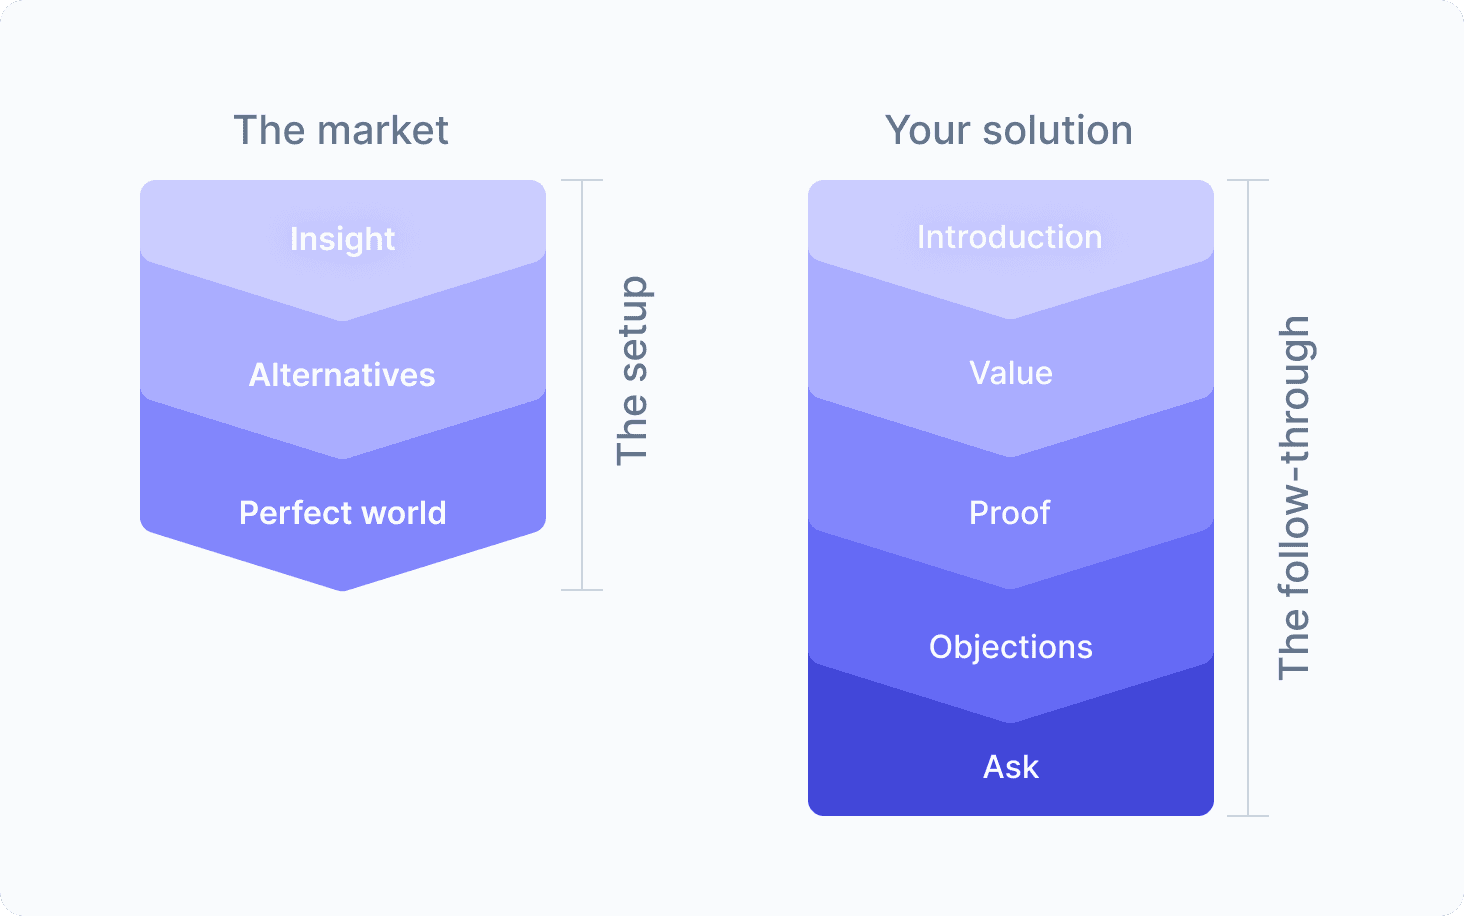 An image showing the setup phase of a sales pitch for the market, and how your solution fits the follow-through.